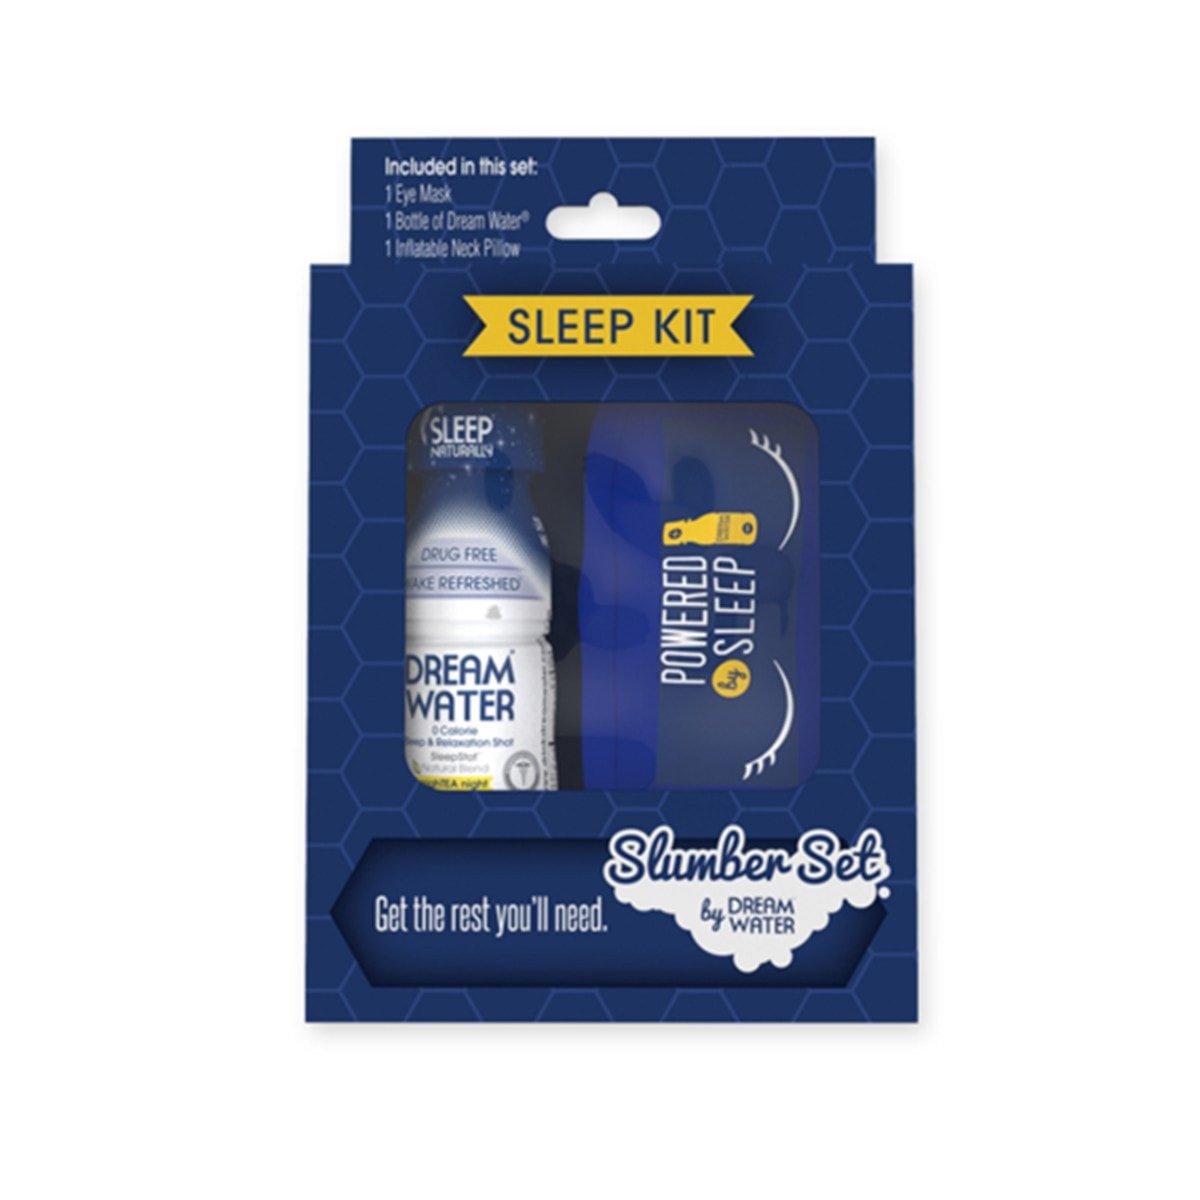 Dream Water Travel Sleep Kit - Perfect Travel Accessory, Product image 1